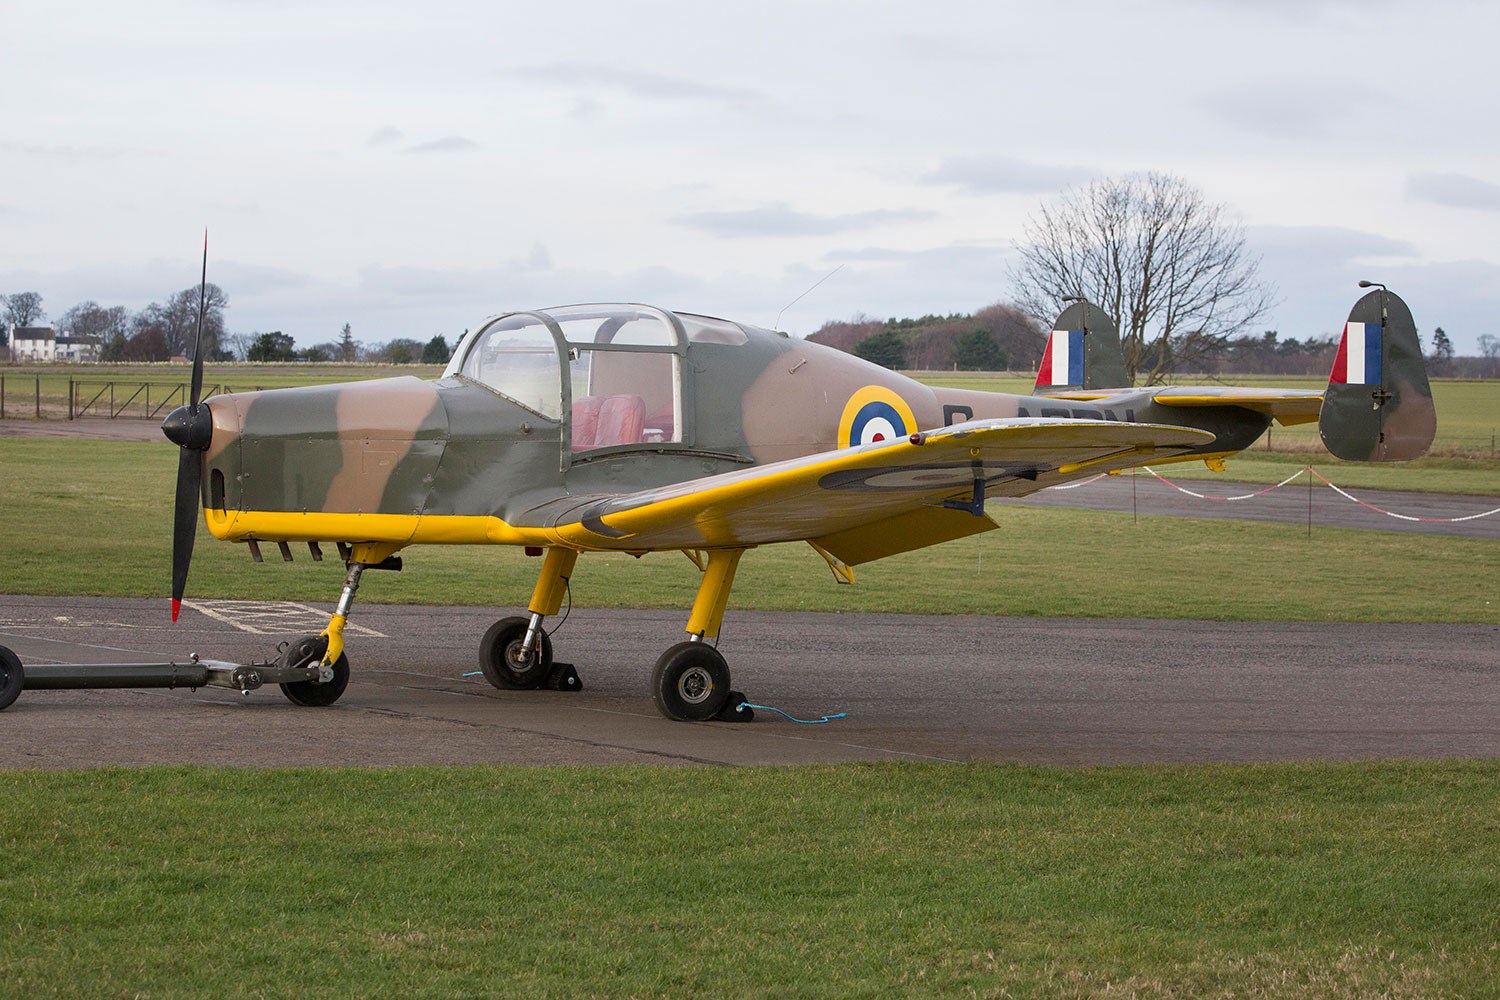 Side view of the General Aircraft Cygnet in an airfield at the National Museum of Flight